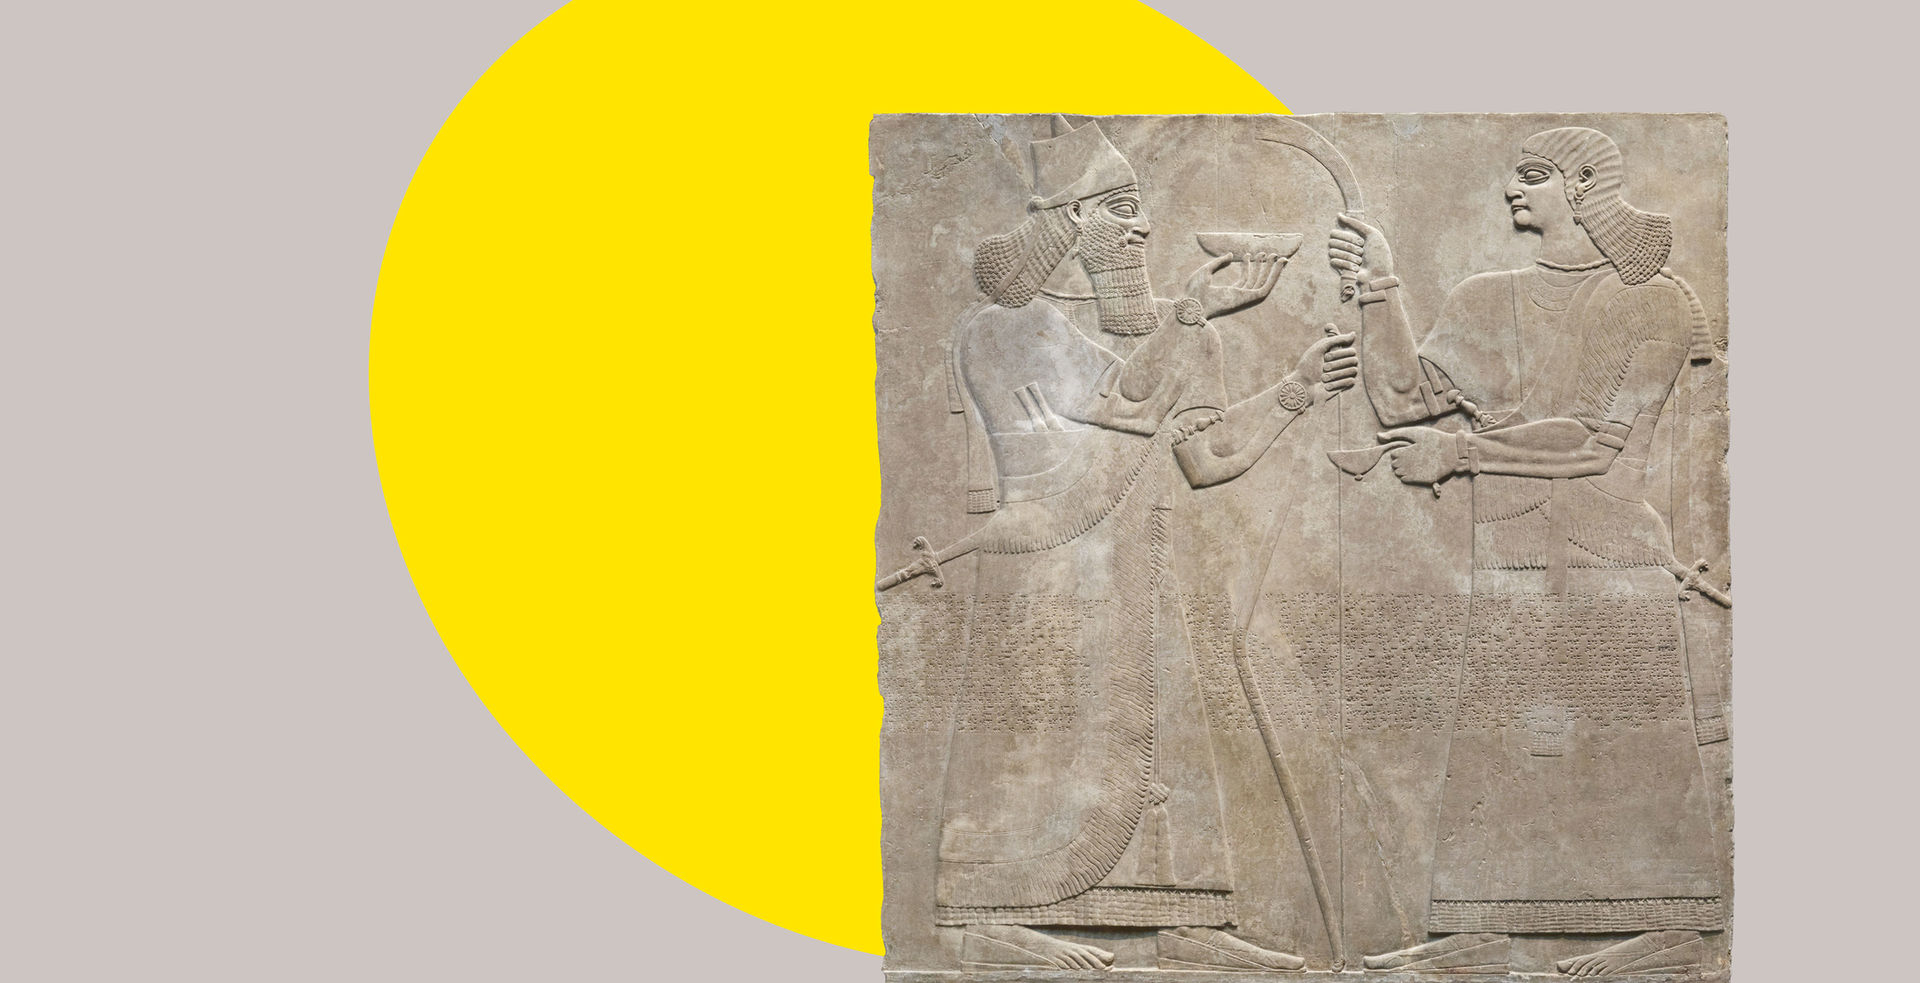 Assyrian relief with a bright yellow ovular spotlight shape behind the figure in the background